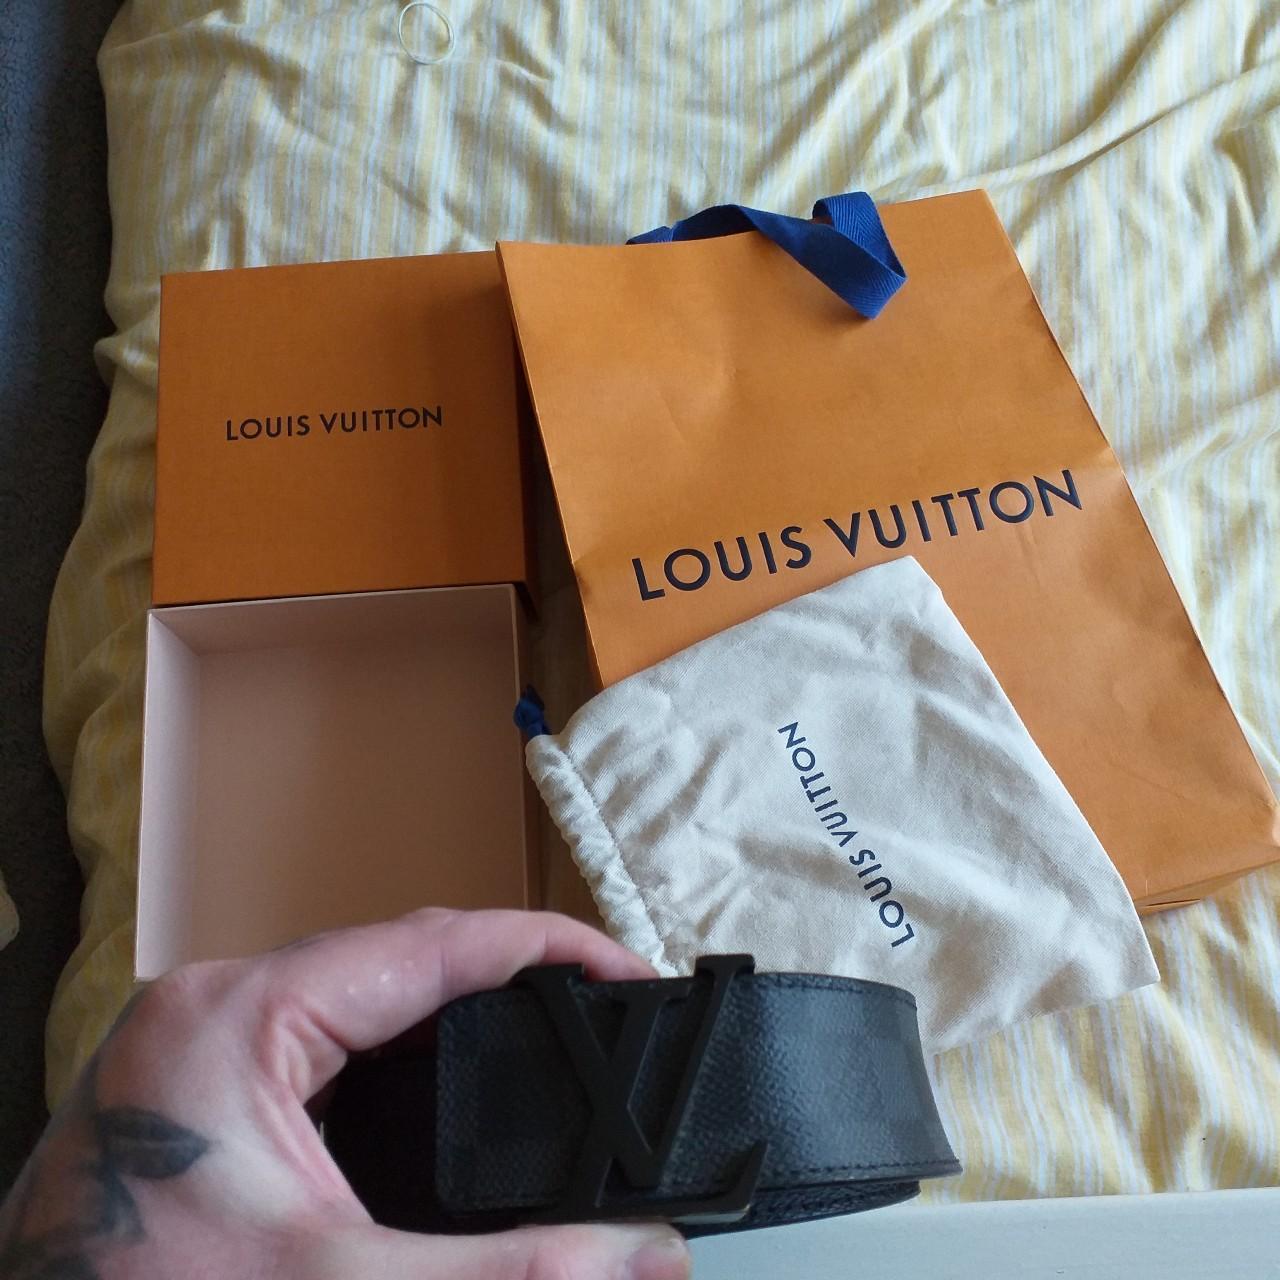 Lv belt 7/10 condition all bags and dust bag